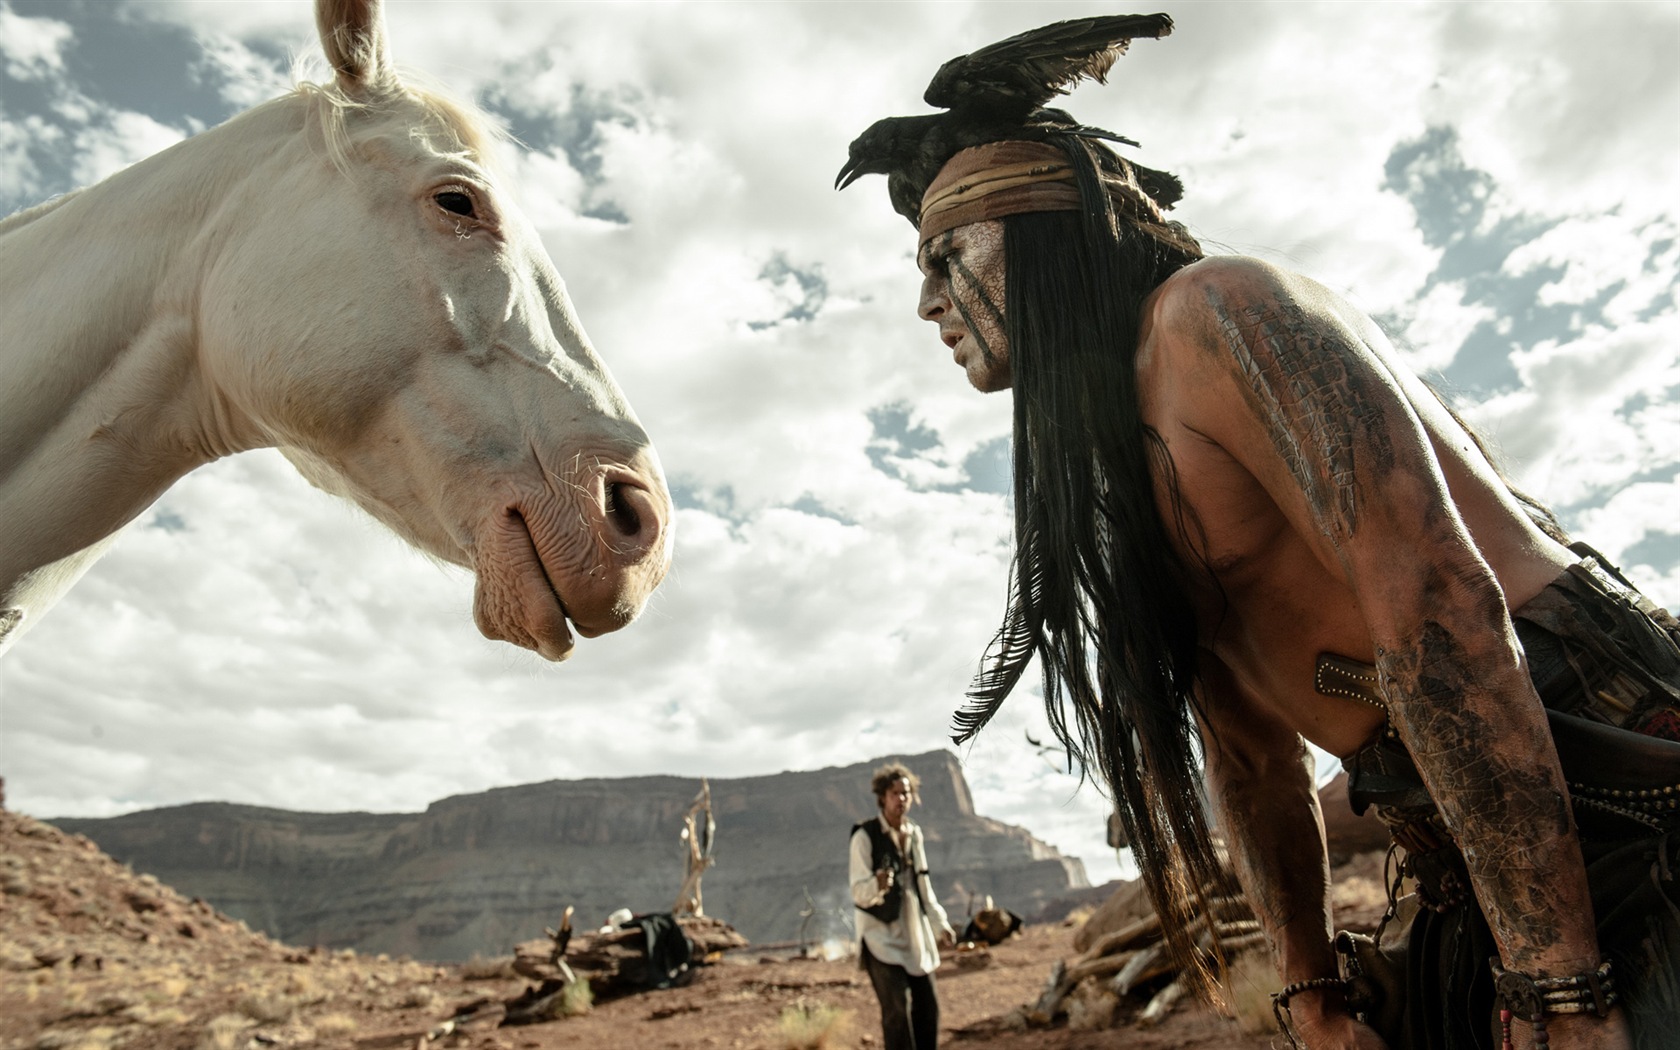 The Lone Ranger HD movie wallpapers #19 - 1680x1050